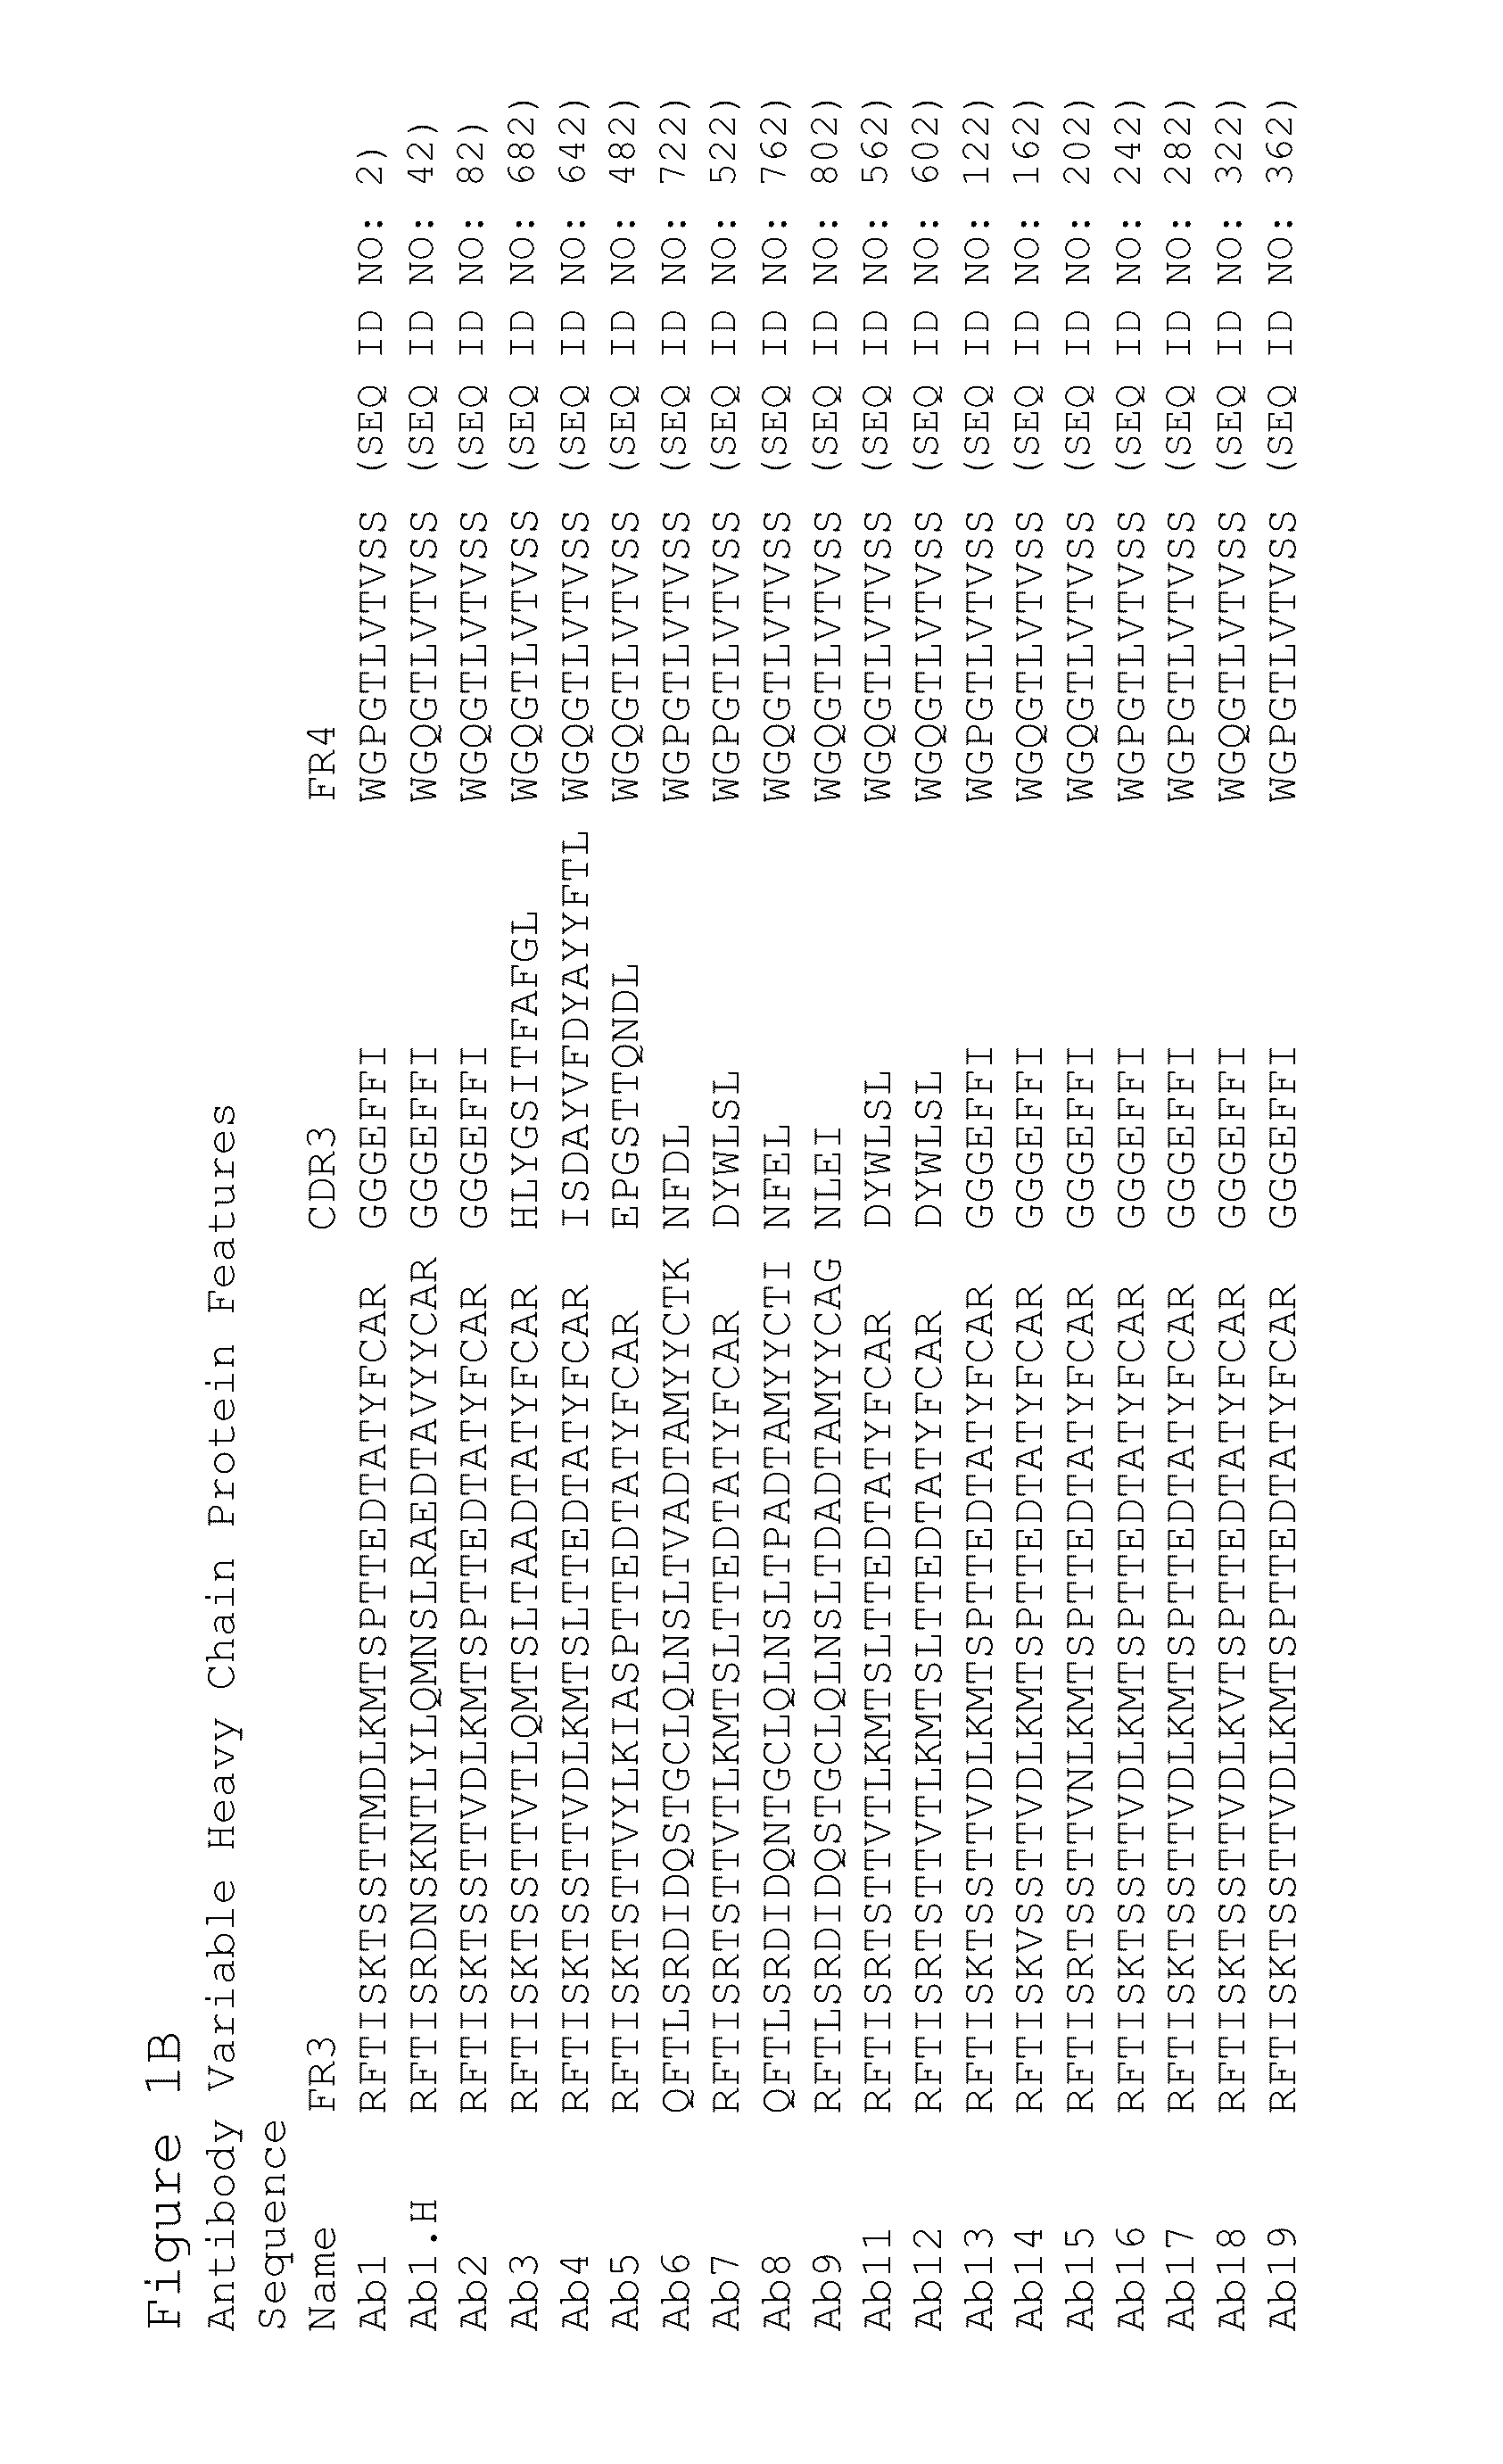 Use of Anti-pacap antibodies and antigen binding fragments thereof for treatment, prevention, or inhibition of photophobia